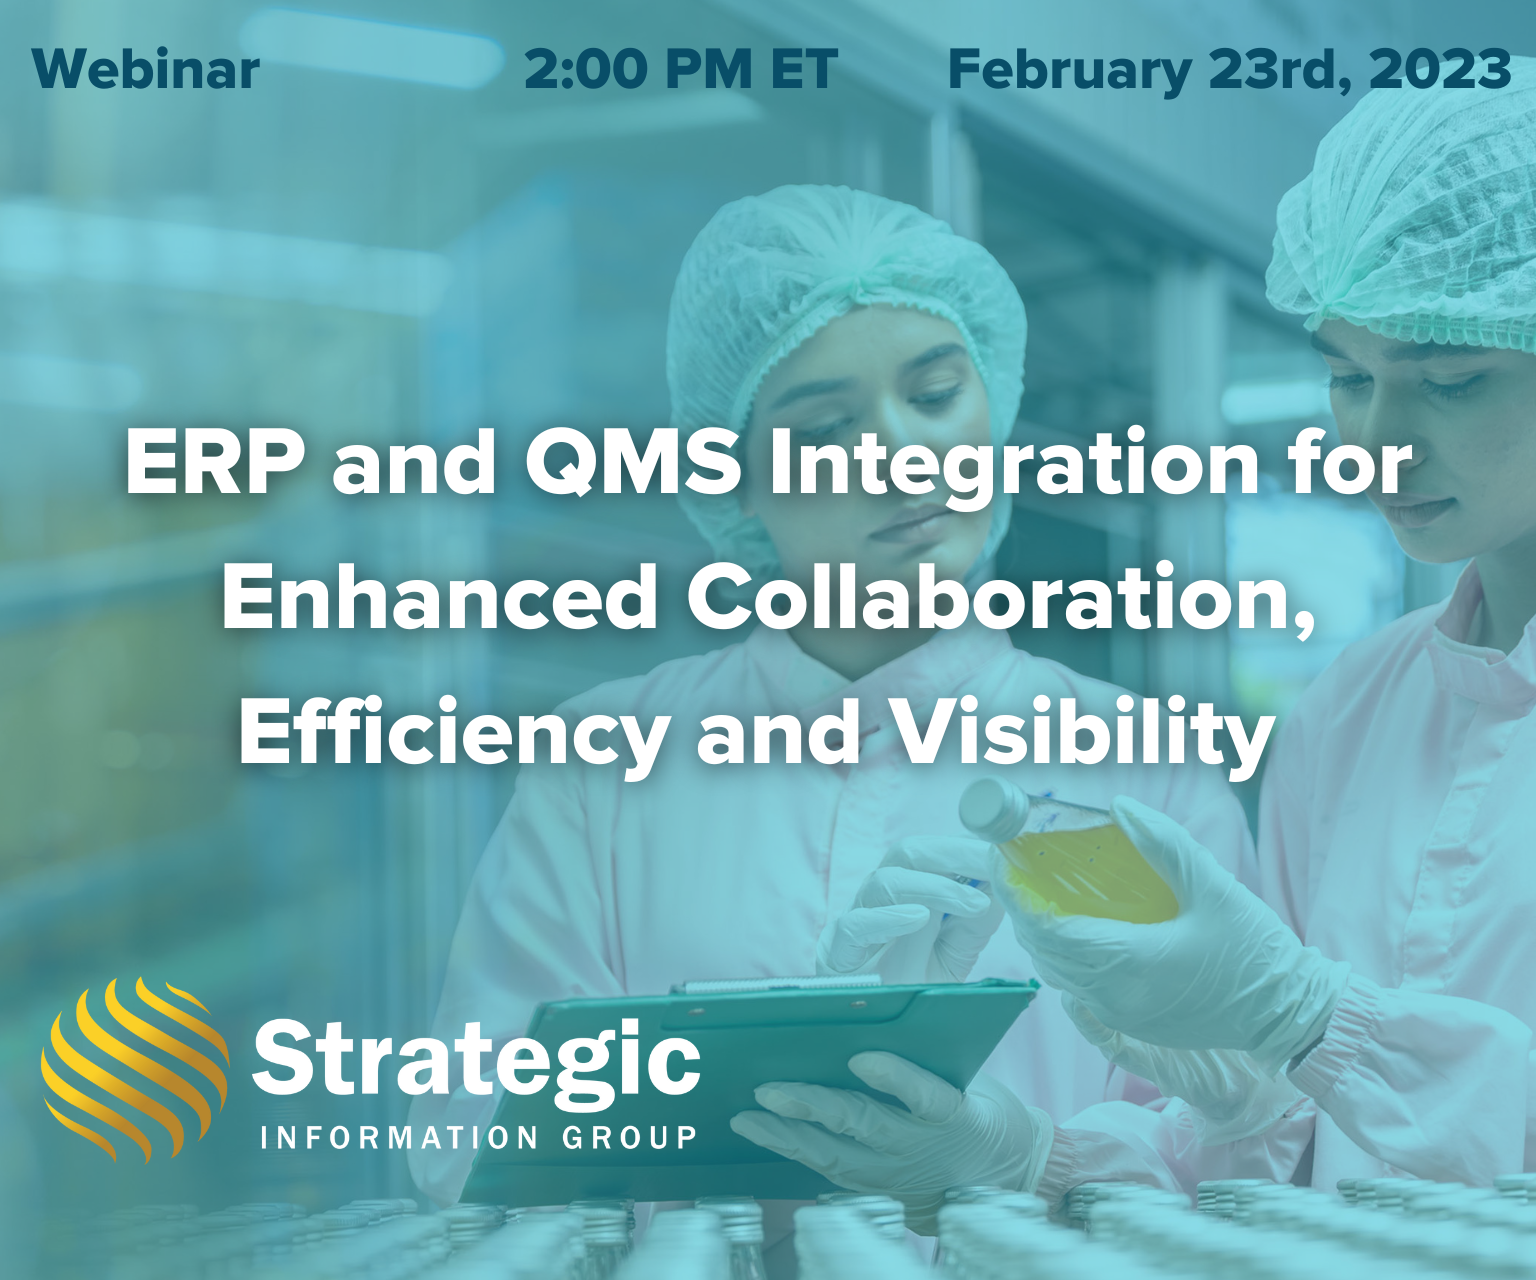 ERP and QMS Integration for Enhanced Collaboration, Efficiency and Visibility